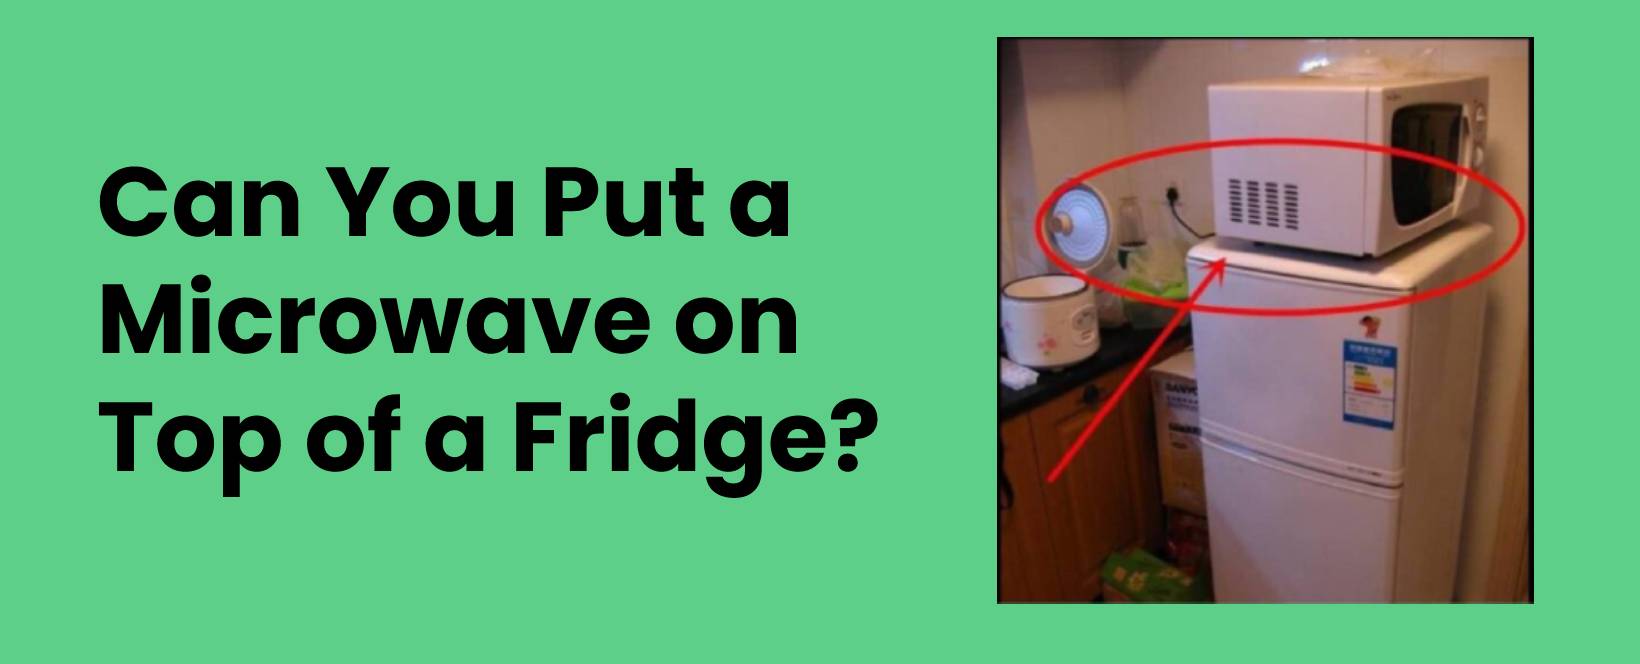 Can-You-Put-a-Microwave-on-Top-of-a-Fridge